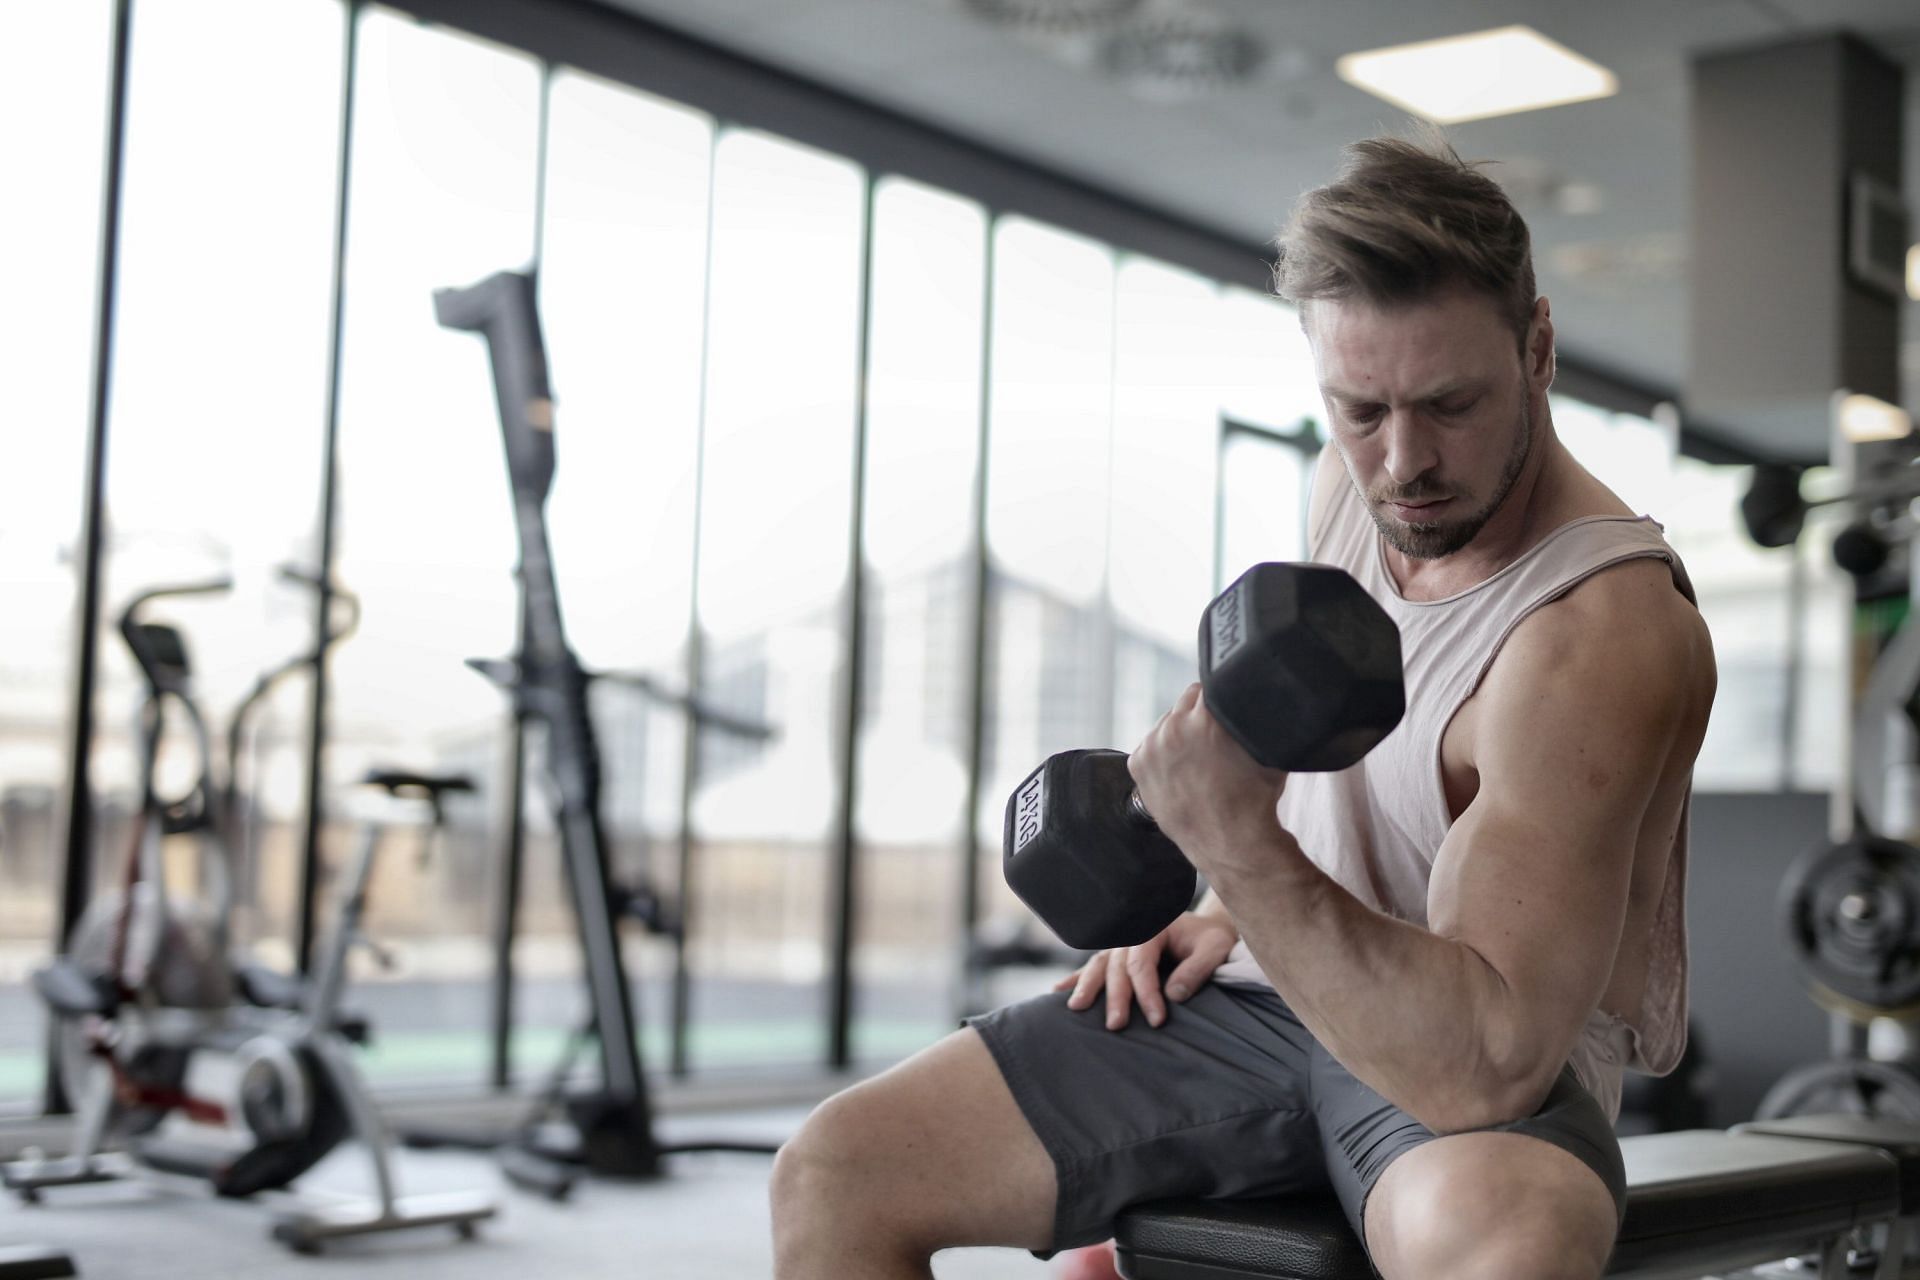 Incorporate the hammer curls in your workout routine for muscle gains and increased strength. (Image via Pexels/Andrea Piacquadio)